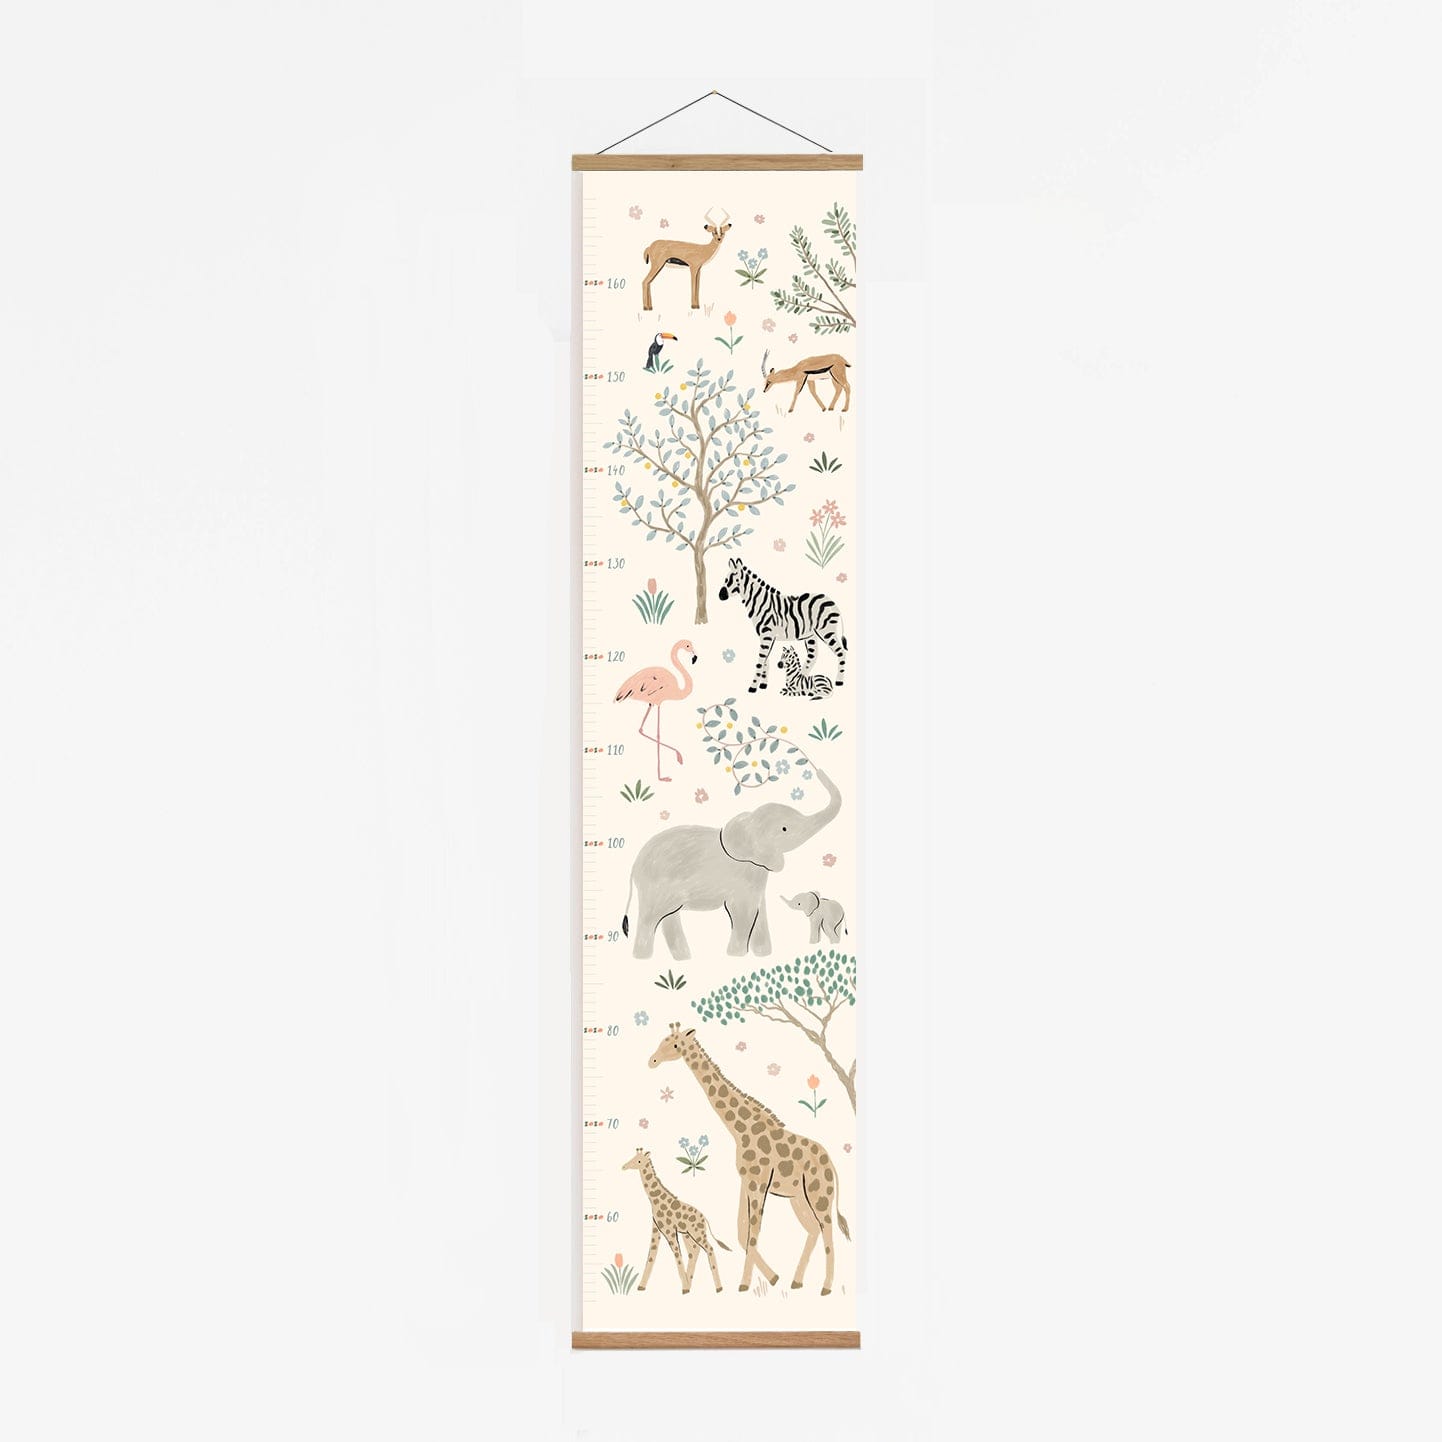 Serengeti height chart in oak hanger. Print features animals with their babies, a giraffe, elephant, zebra and deer and in painted detail with commiphora trees, flowers and a flamingo and toucan